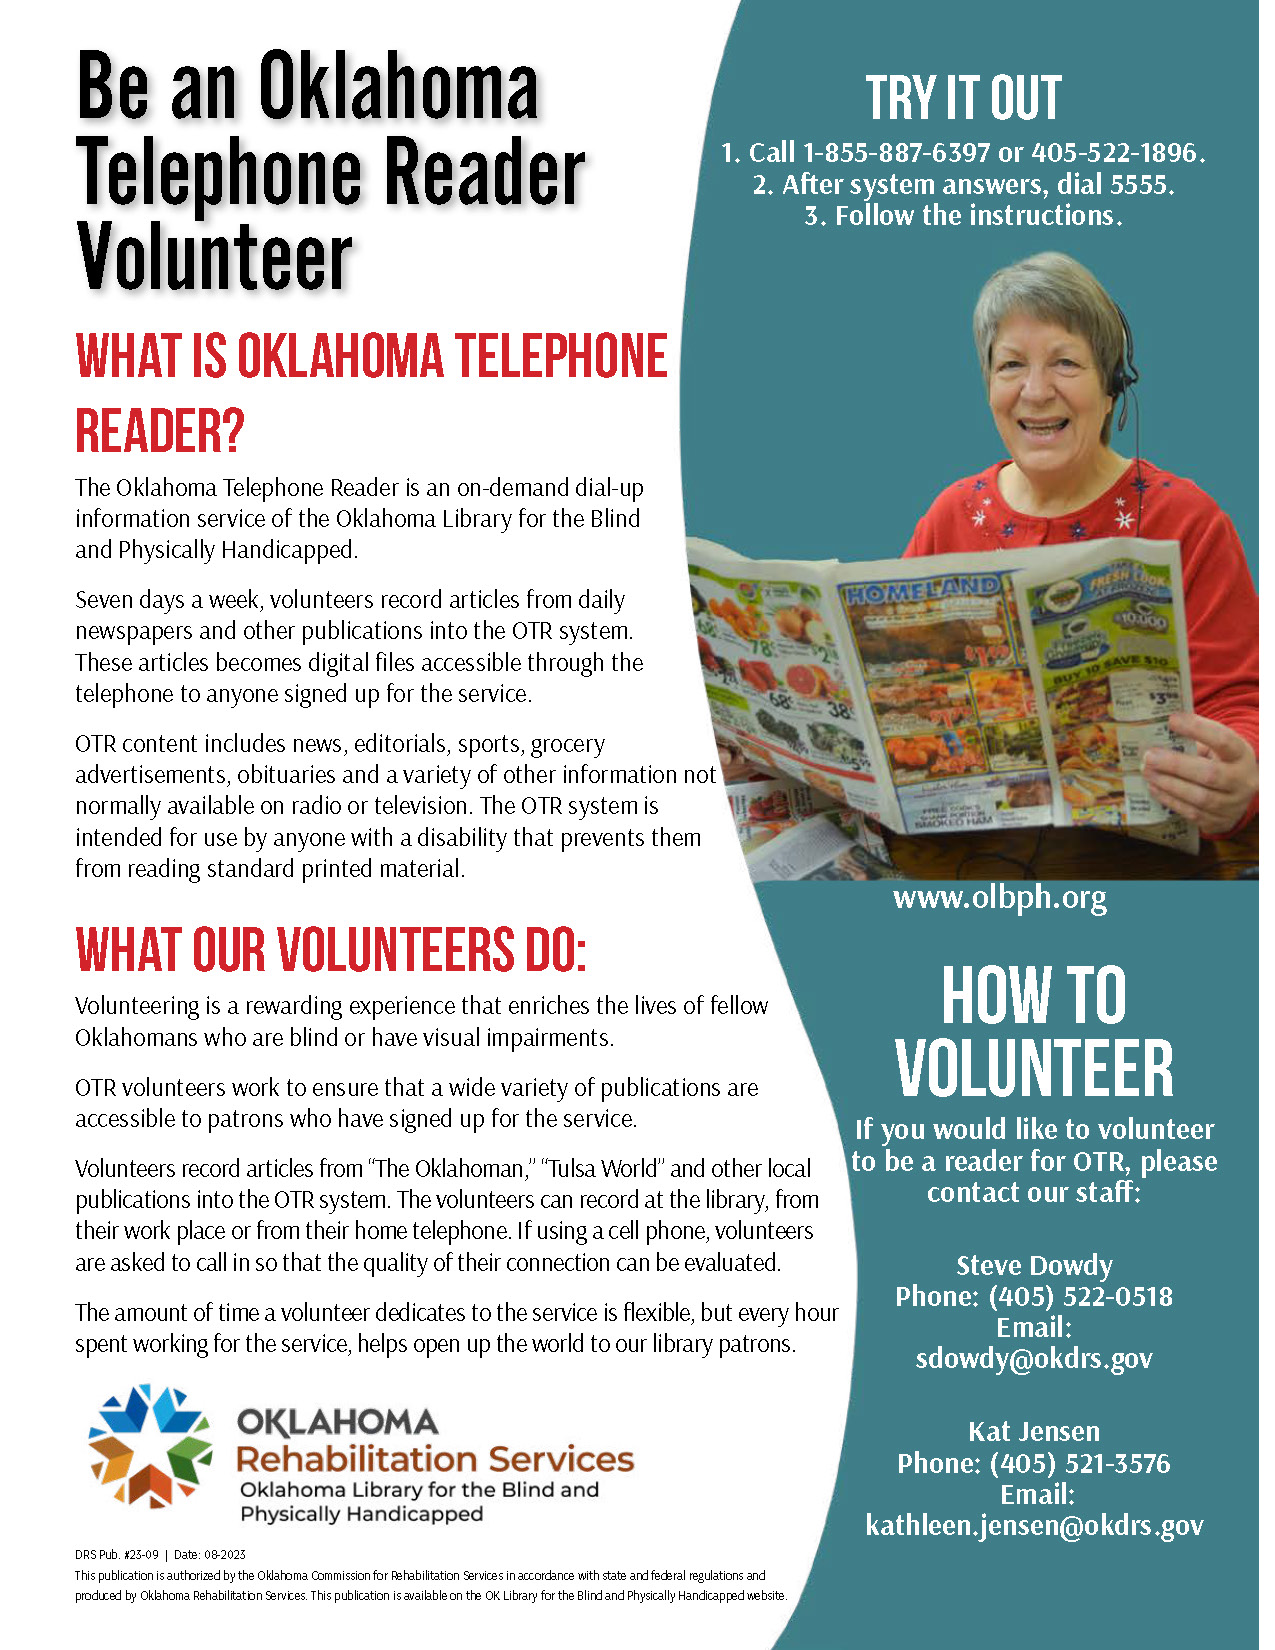 Cover of Oklahoma Telephone Reader